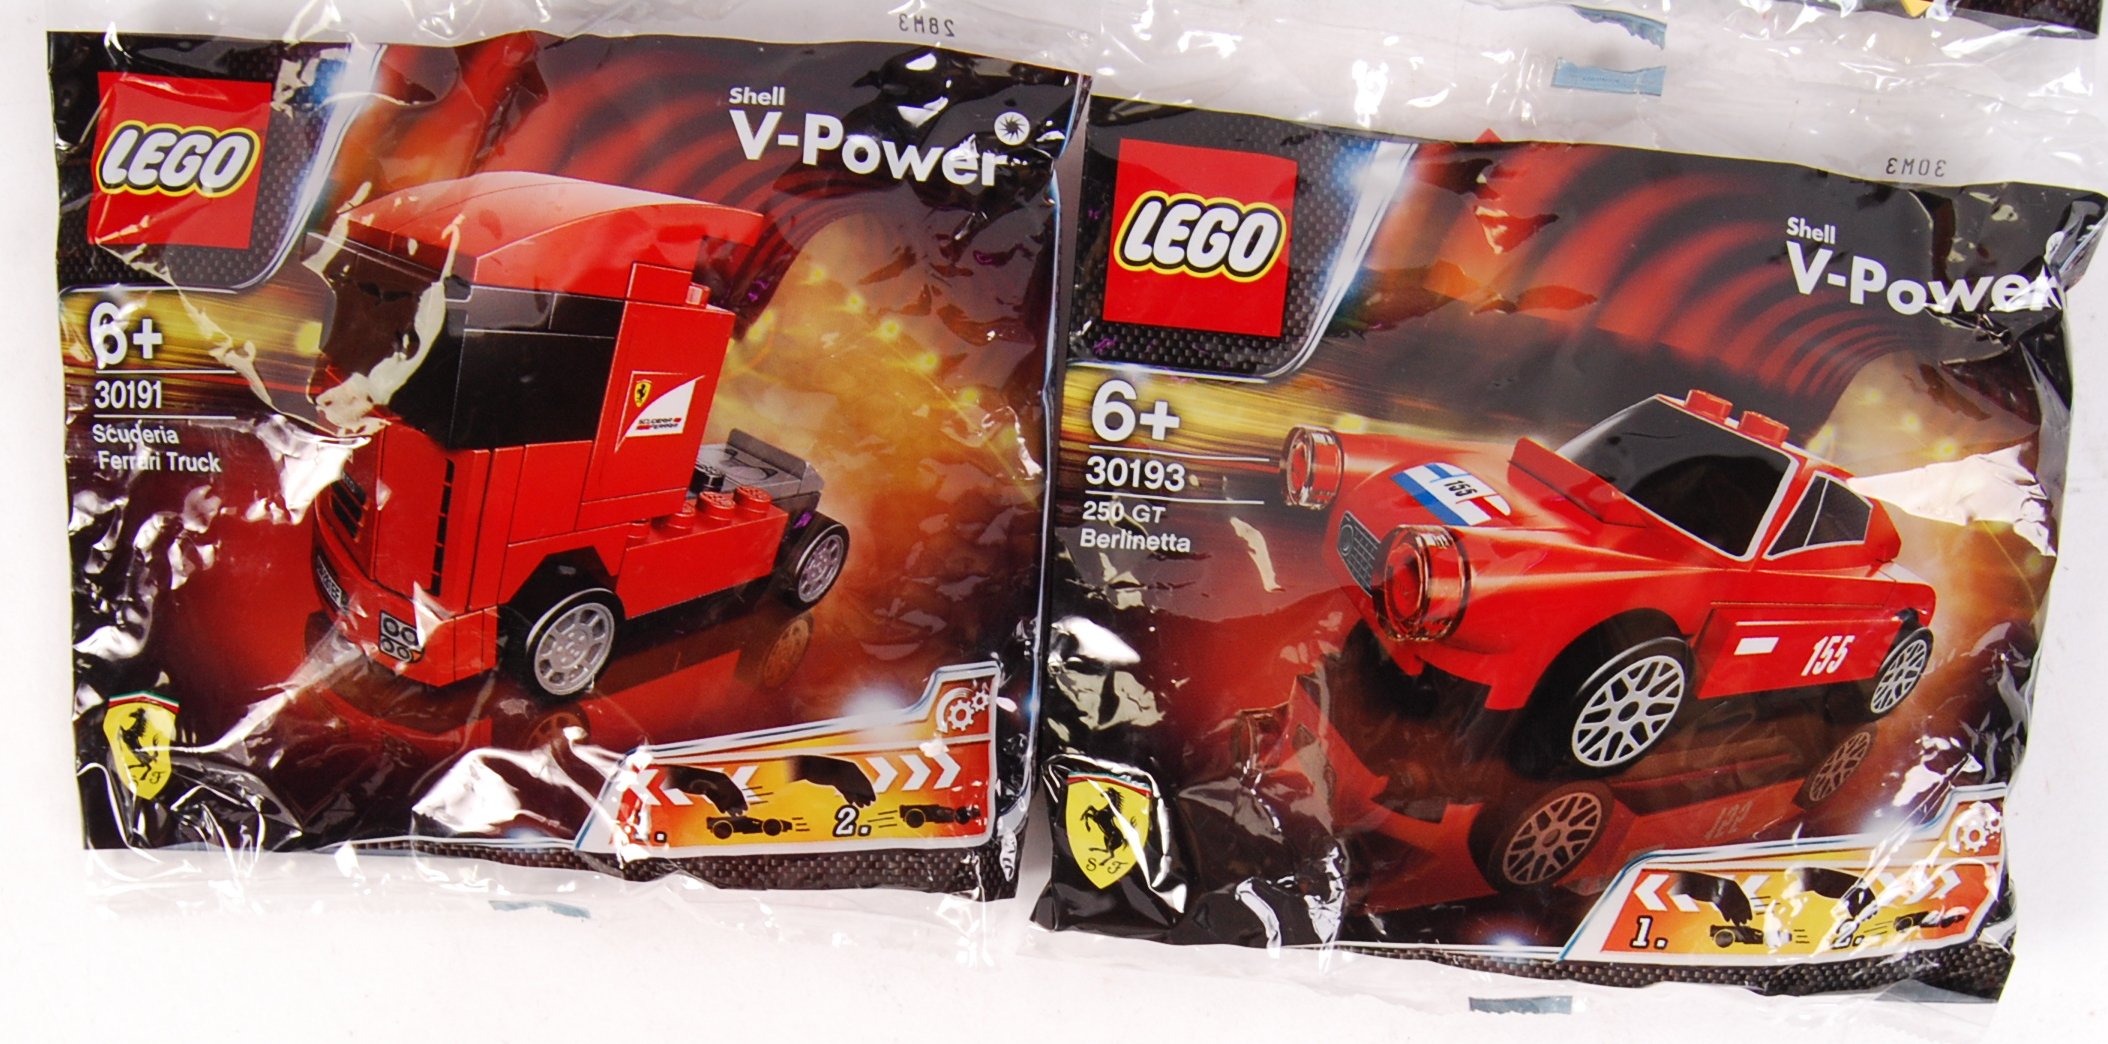 LEGO SHELL V-POWER POLYBAGS - Image 3 of 3